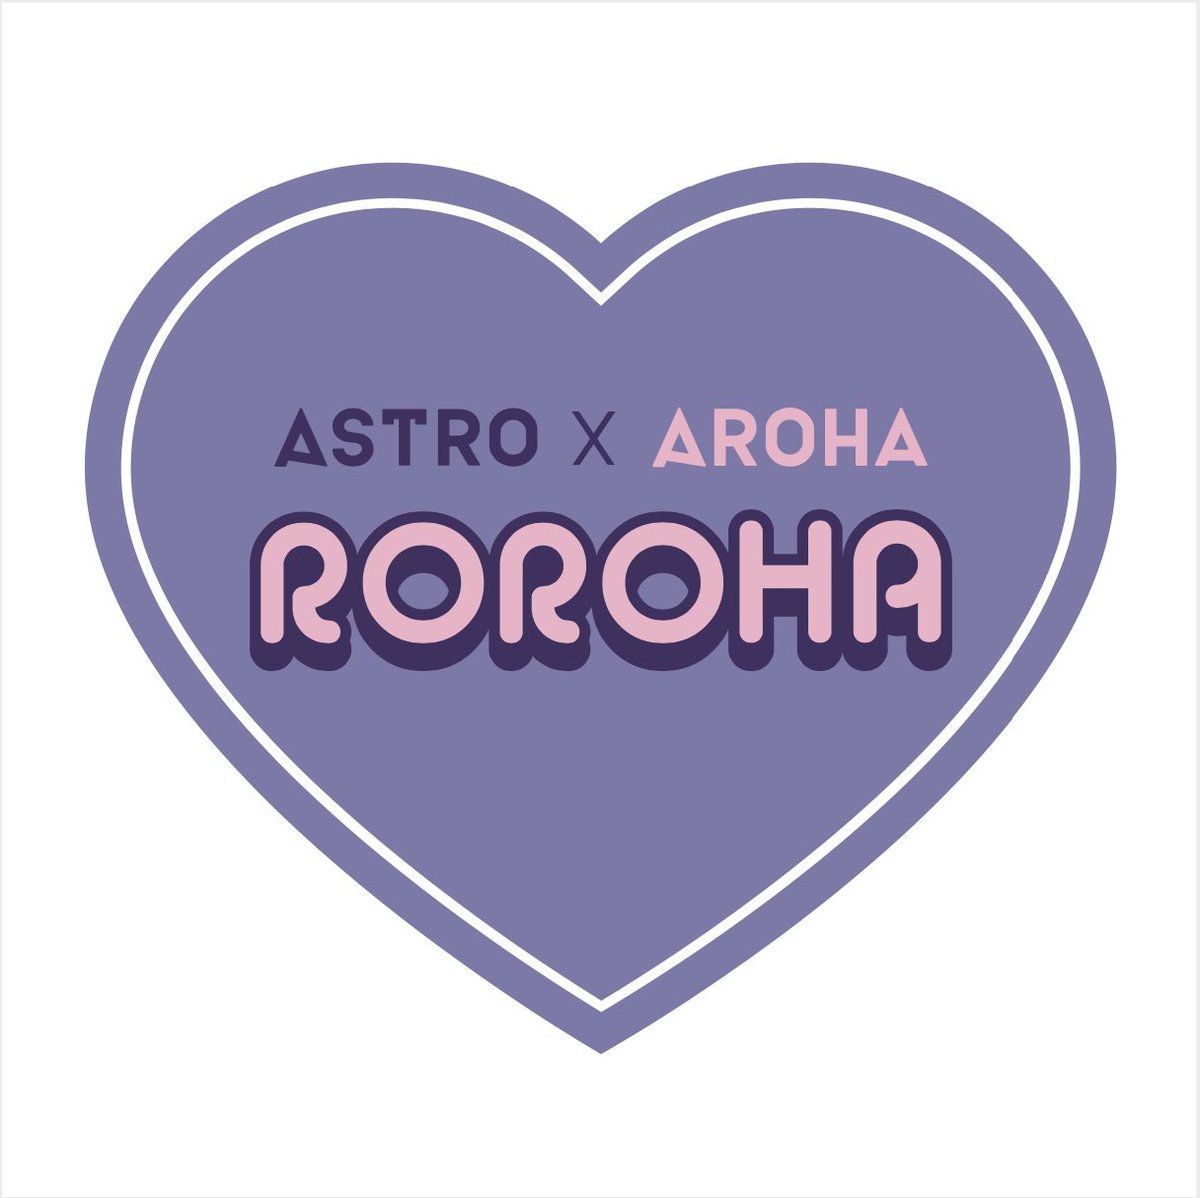 ROROHA OFFICIAL on Twitter: 